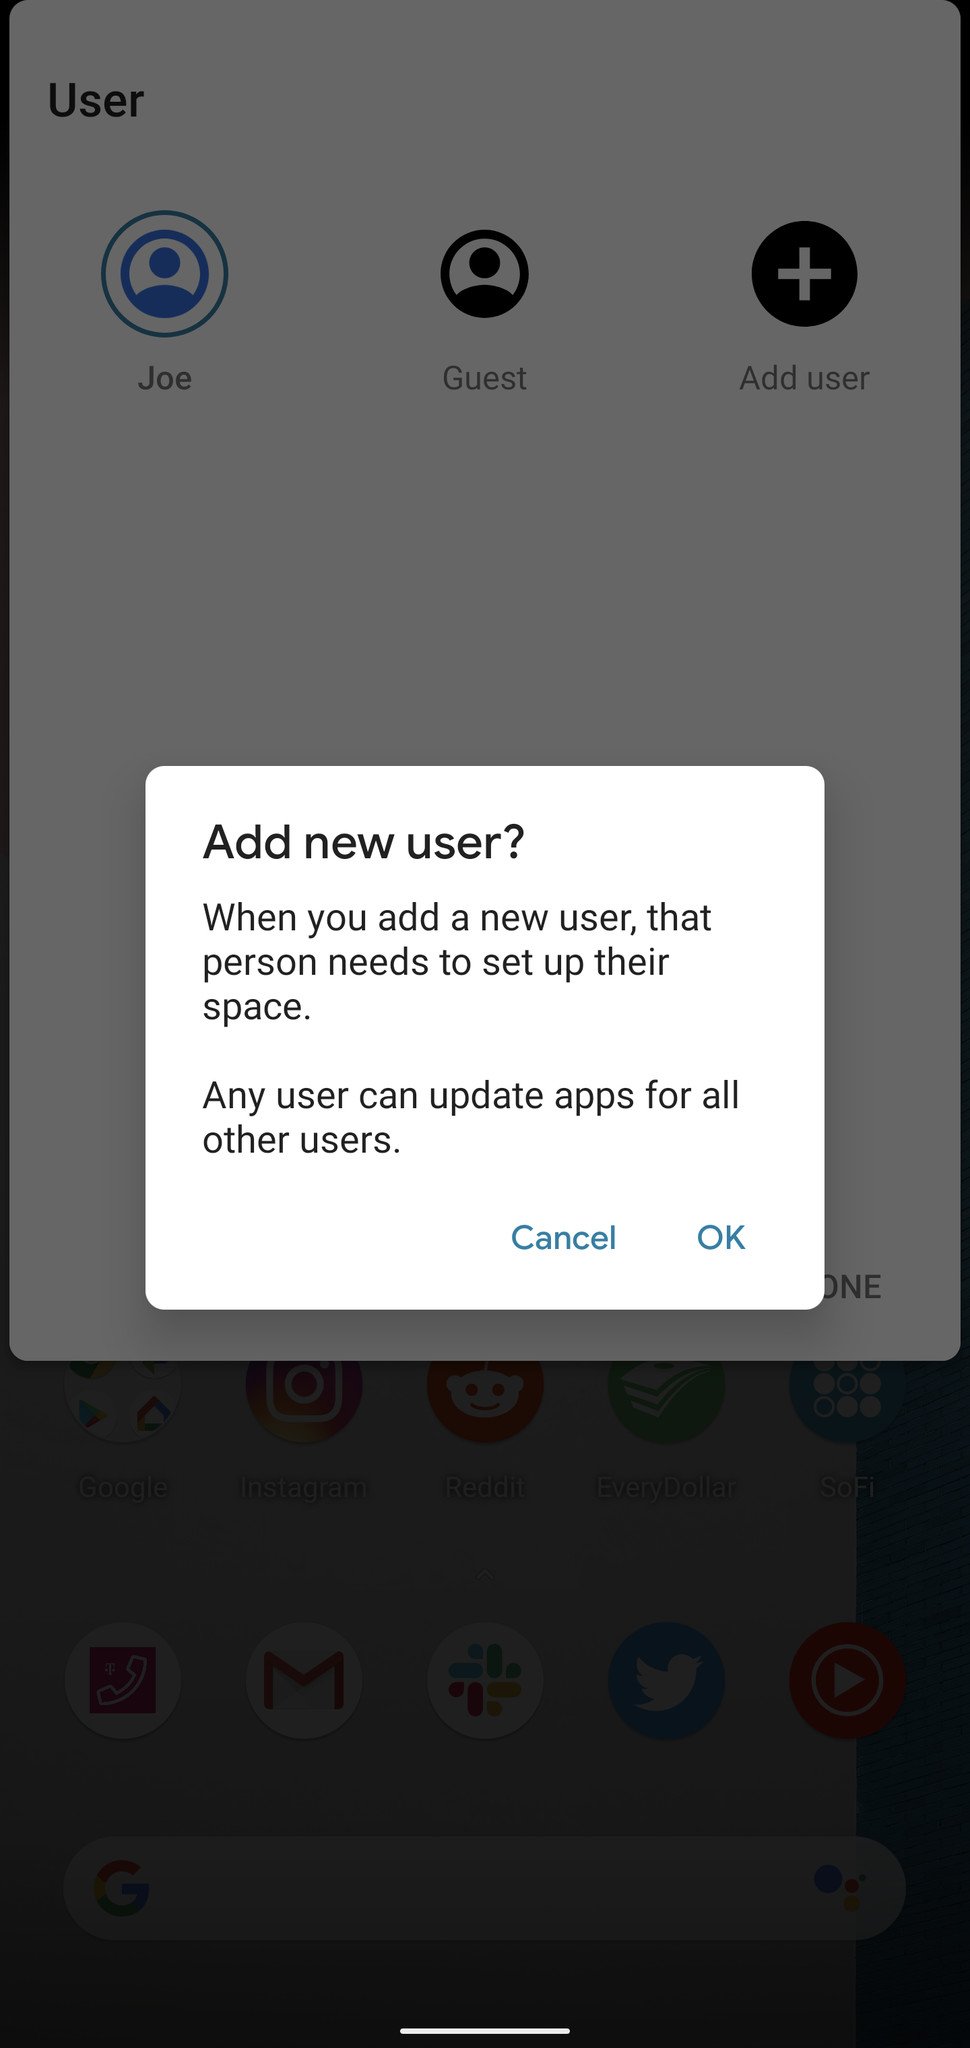 Adding a new user to an Android phone